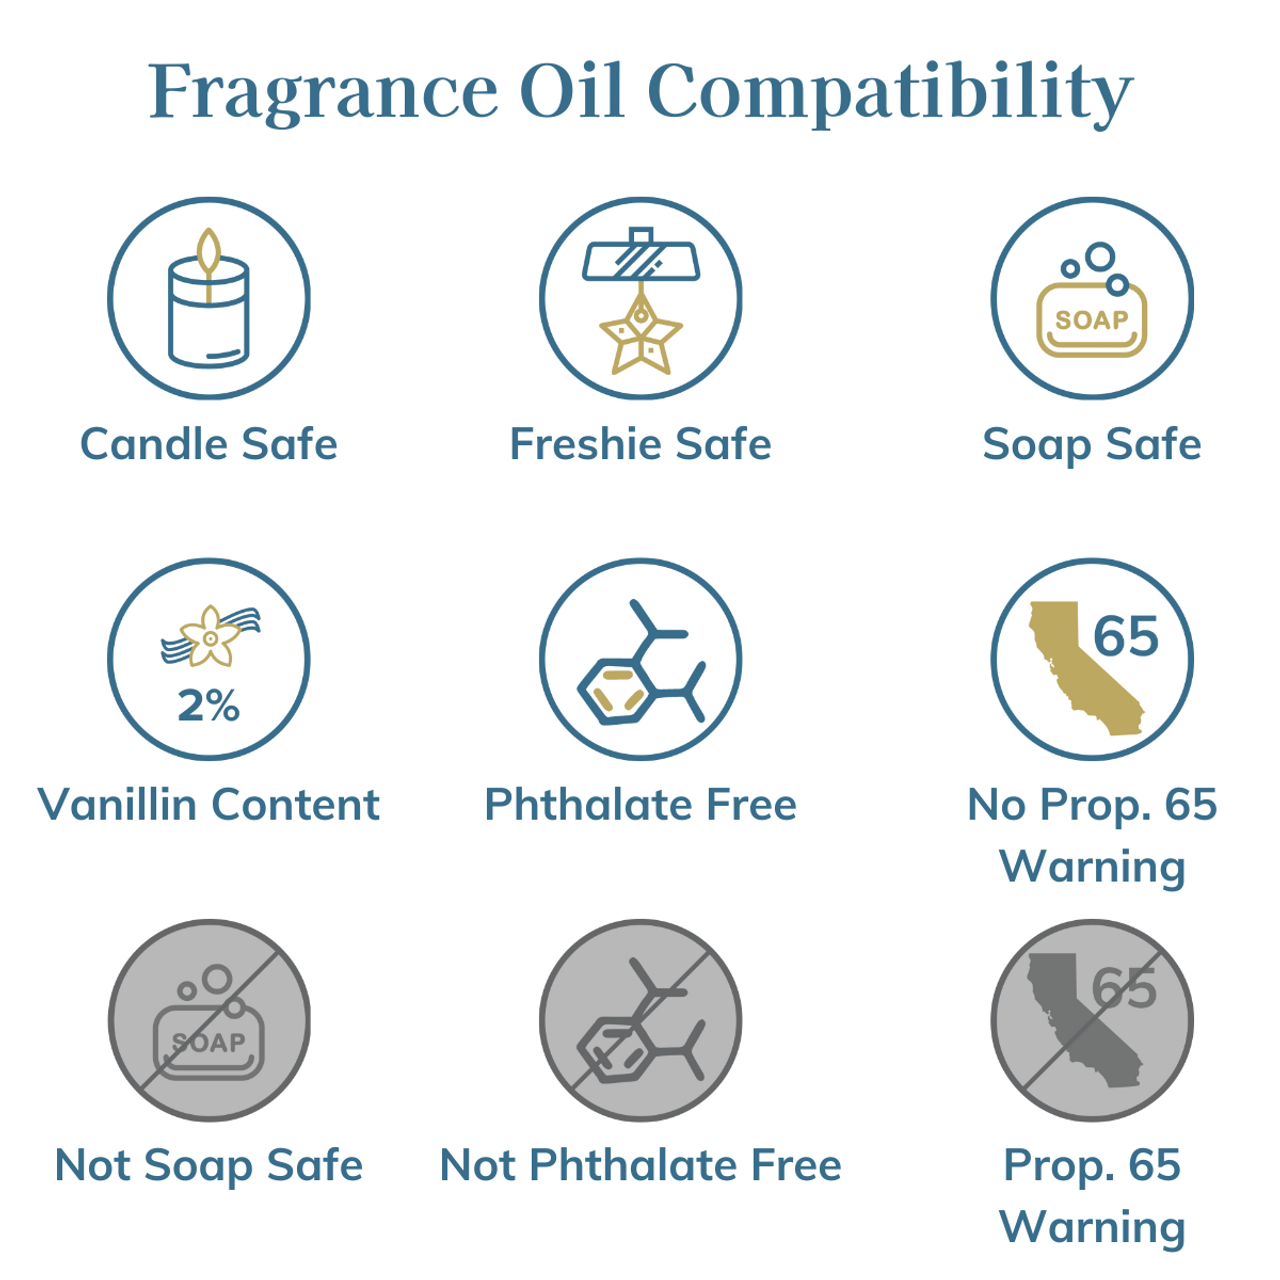 Fireside (BBW type) Fragrance Oil for Candle, Soap & Cosmetics